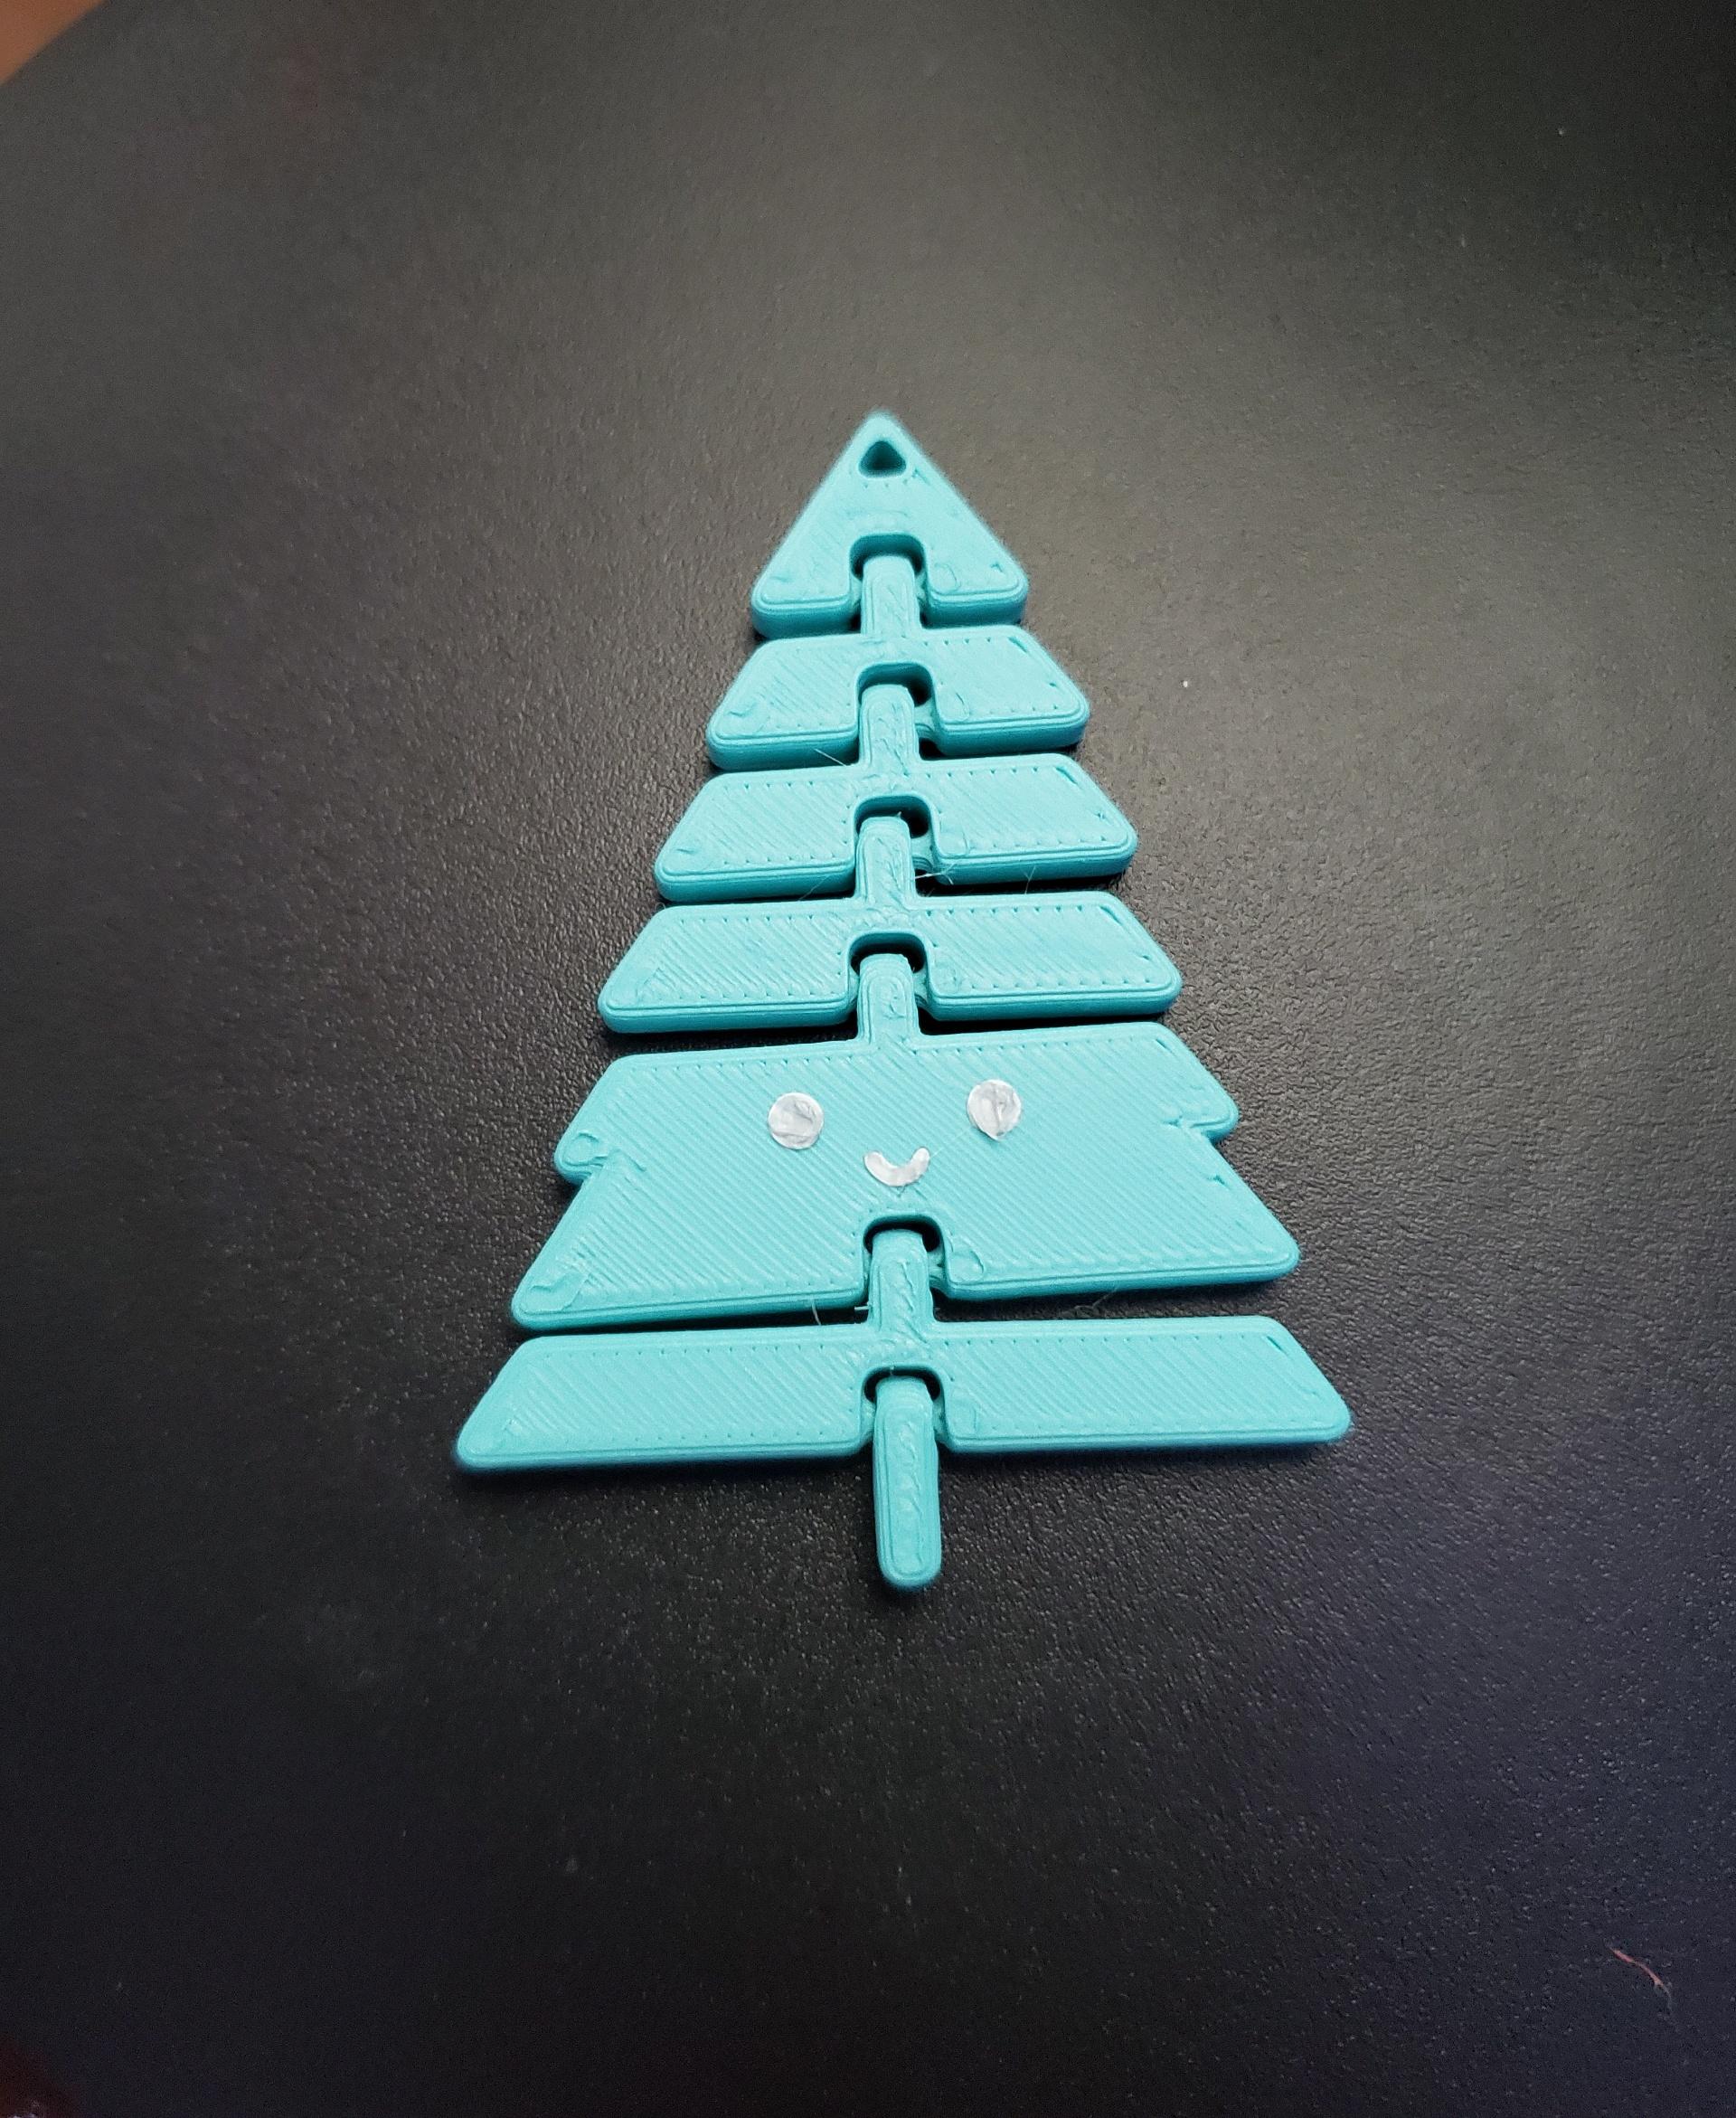 Articulated Kawaii Christmas Tree Keychain - Print in place fidget toy - 3mf - polyterra arctic teal - 3d model